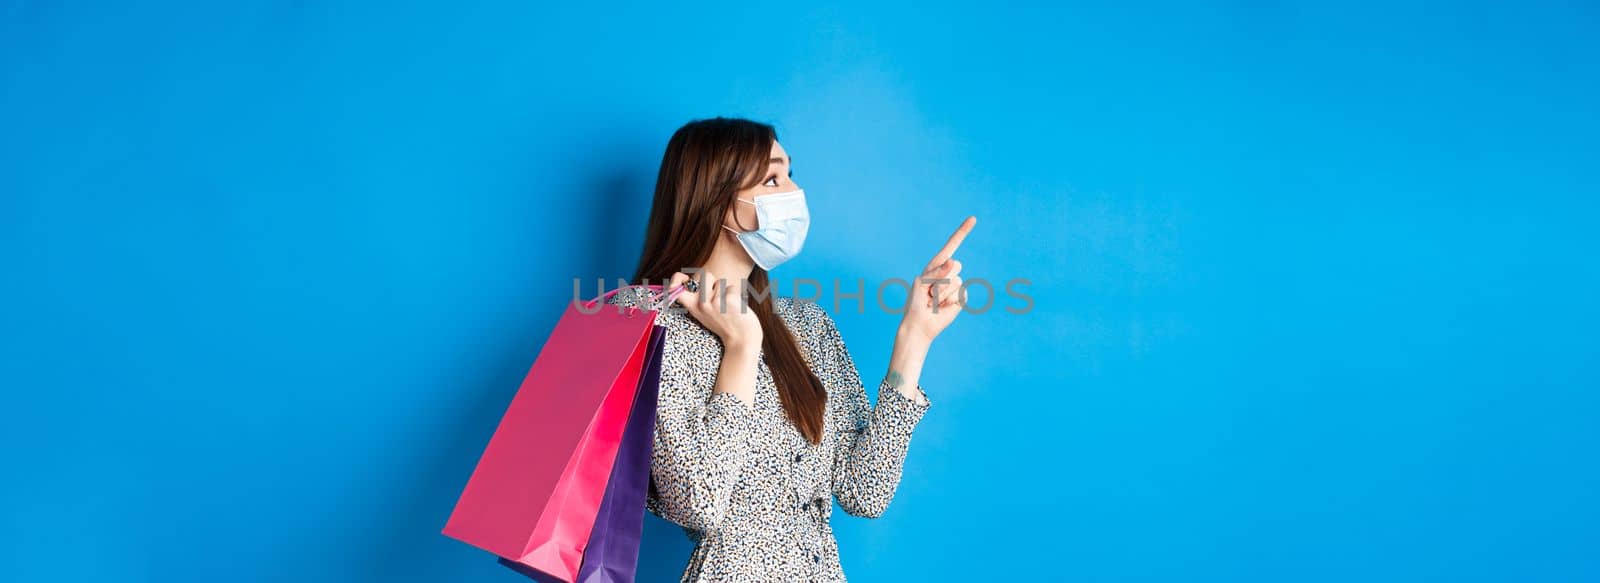 Covid-19, pandemic and lifestyle concept. Profile of excited girl wears medical mask on shopping, pointing and looking at upper left corner logo, holding purchases over shoulder, blue background.